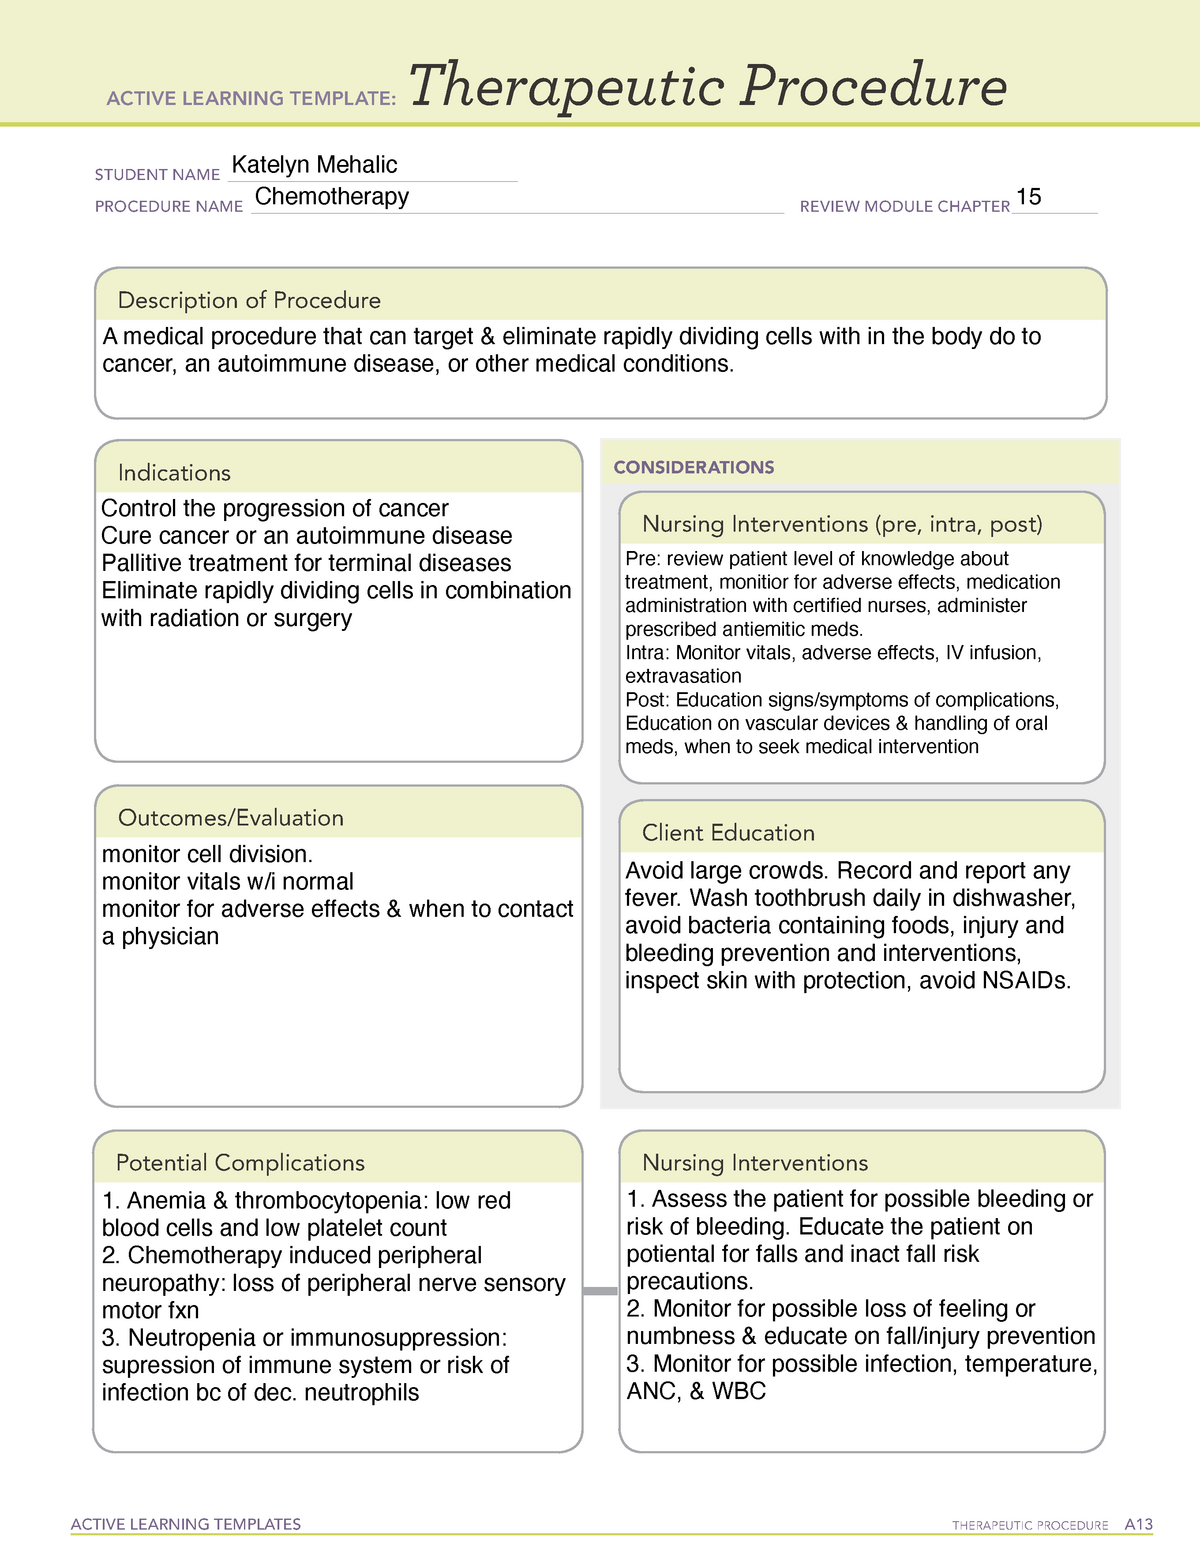 Chemotherapy therapeutic procedure ACTIVE LEARNING TEMPLATES